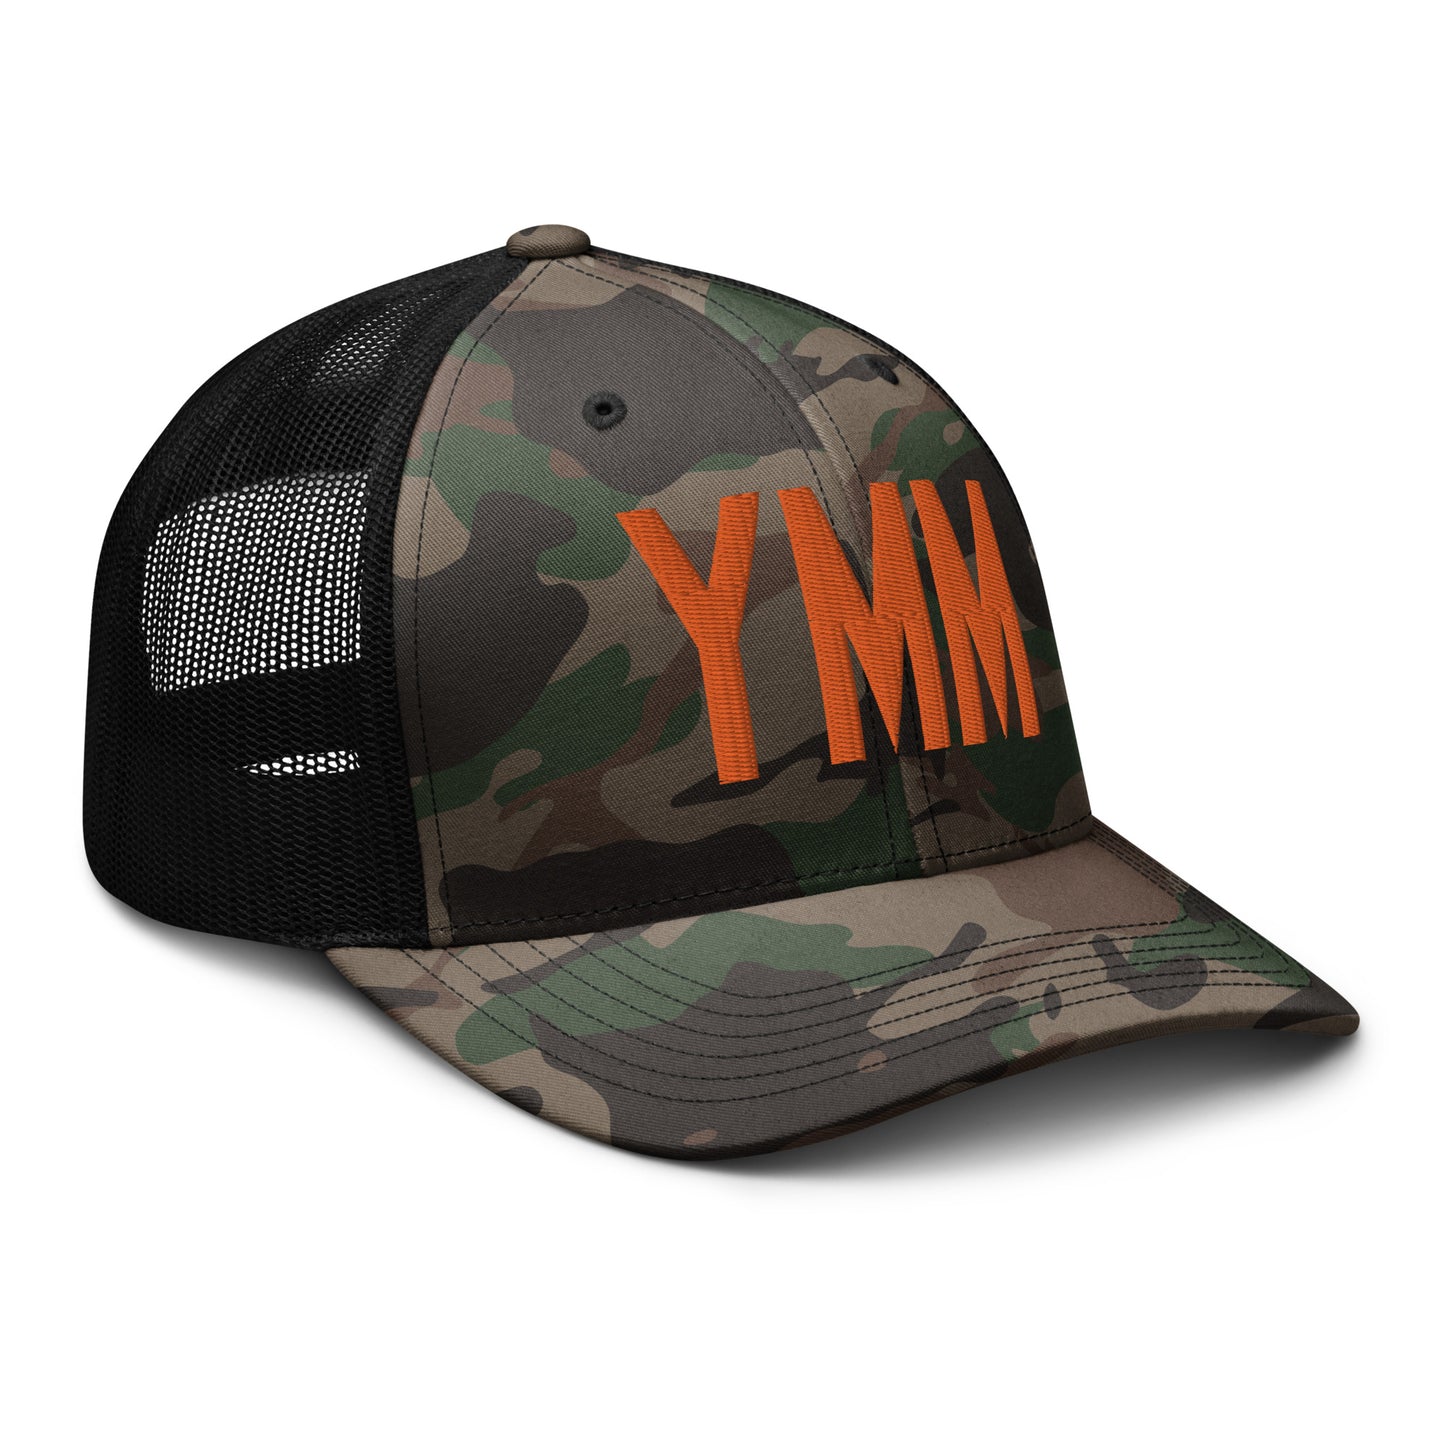 Airport Code Camouflage Trucker Hat - Orange • YMM Fort McMurray • YHM Designs - Image 12